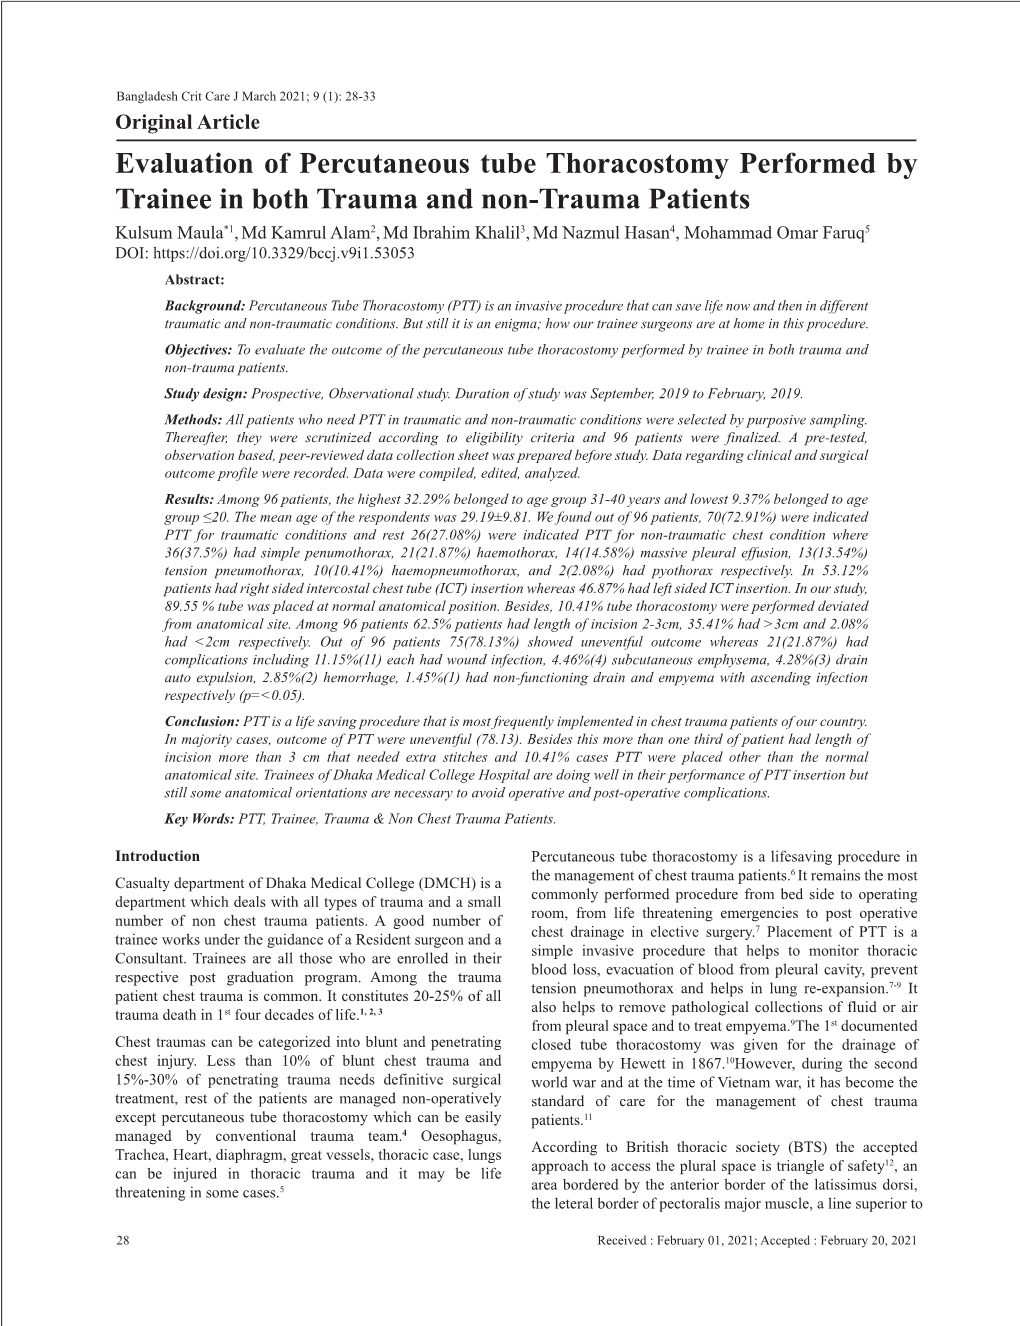 Evaluation of Percutaneous Tube Thoracostomy Performed By